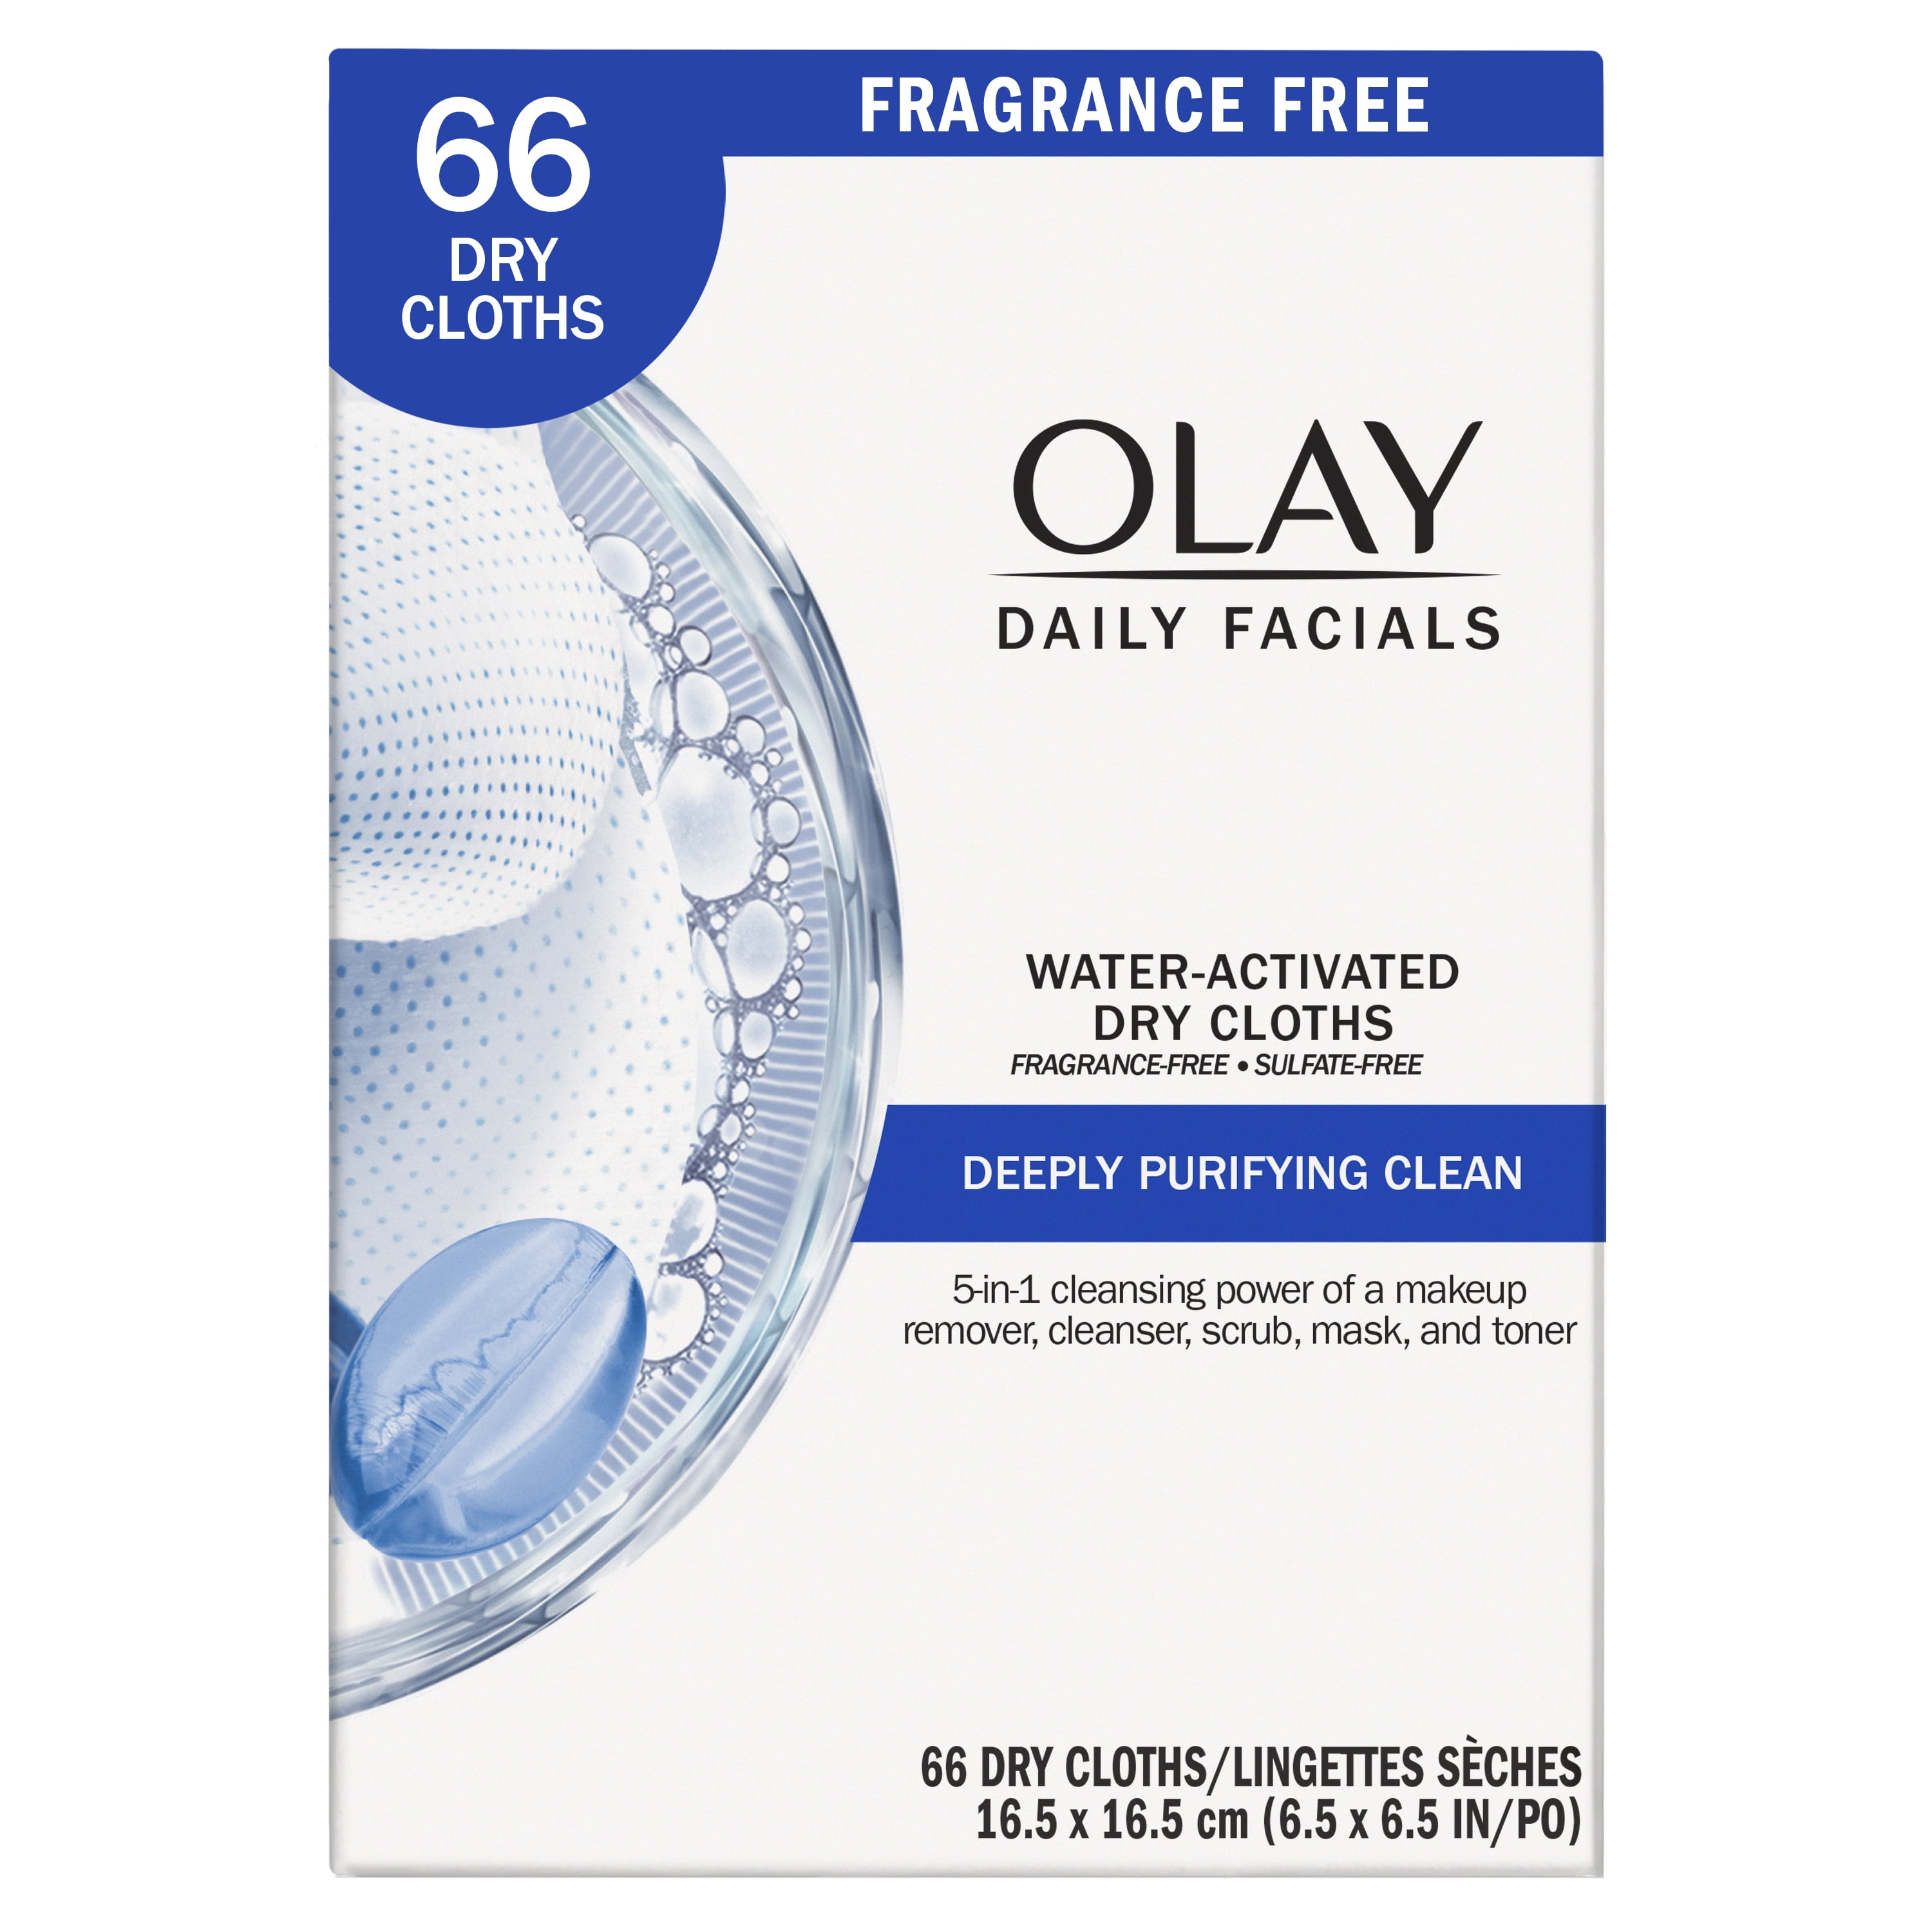 Olay Daily Facials Deeply Purifying Cleansing Wipes, Face Wash and Makeup Remover Wipes, Fragrance-Free, 66 Count